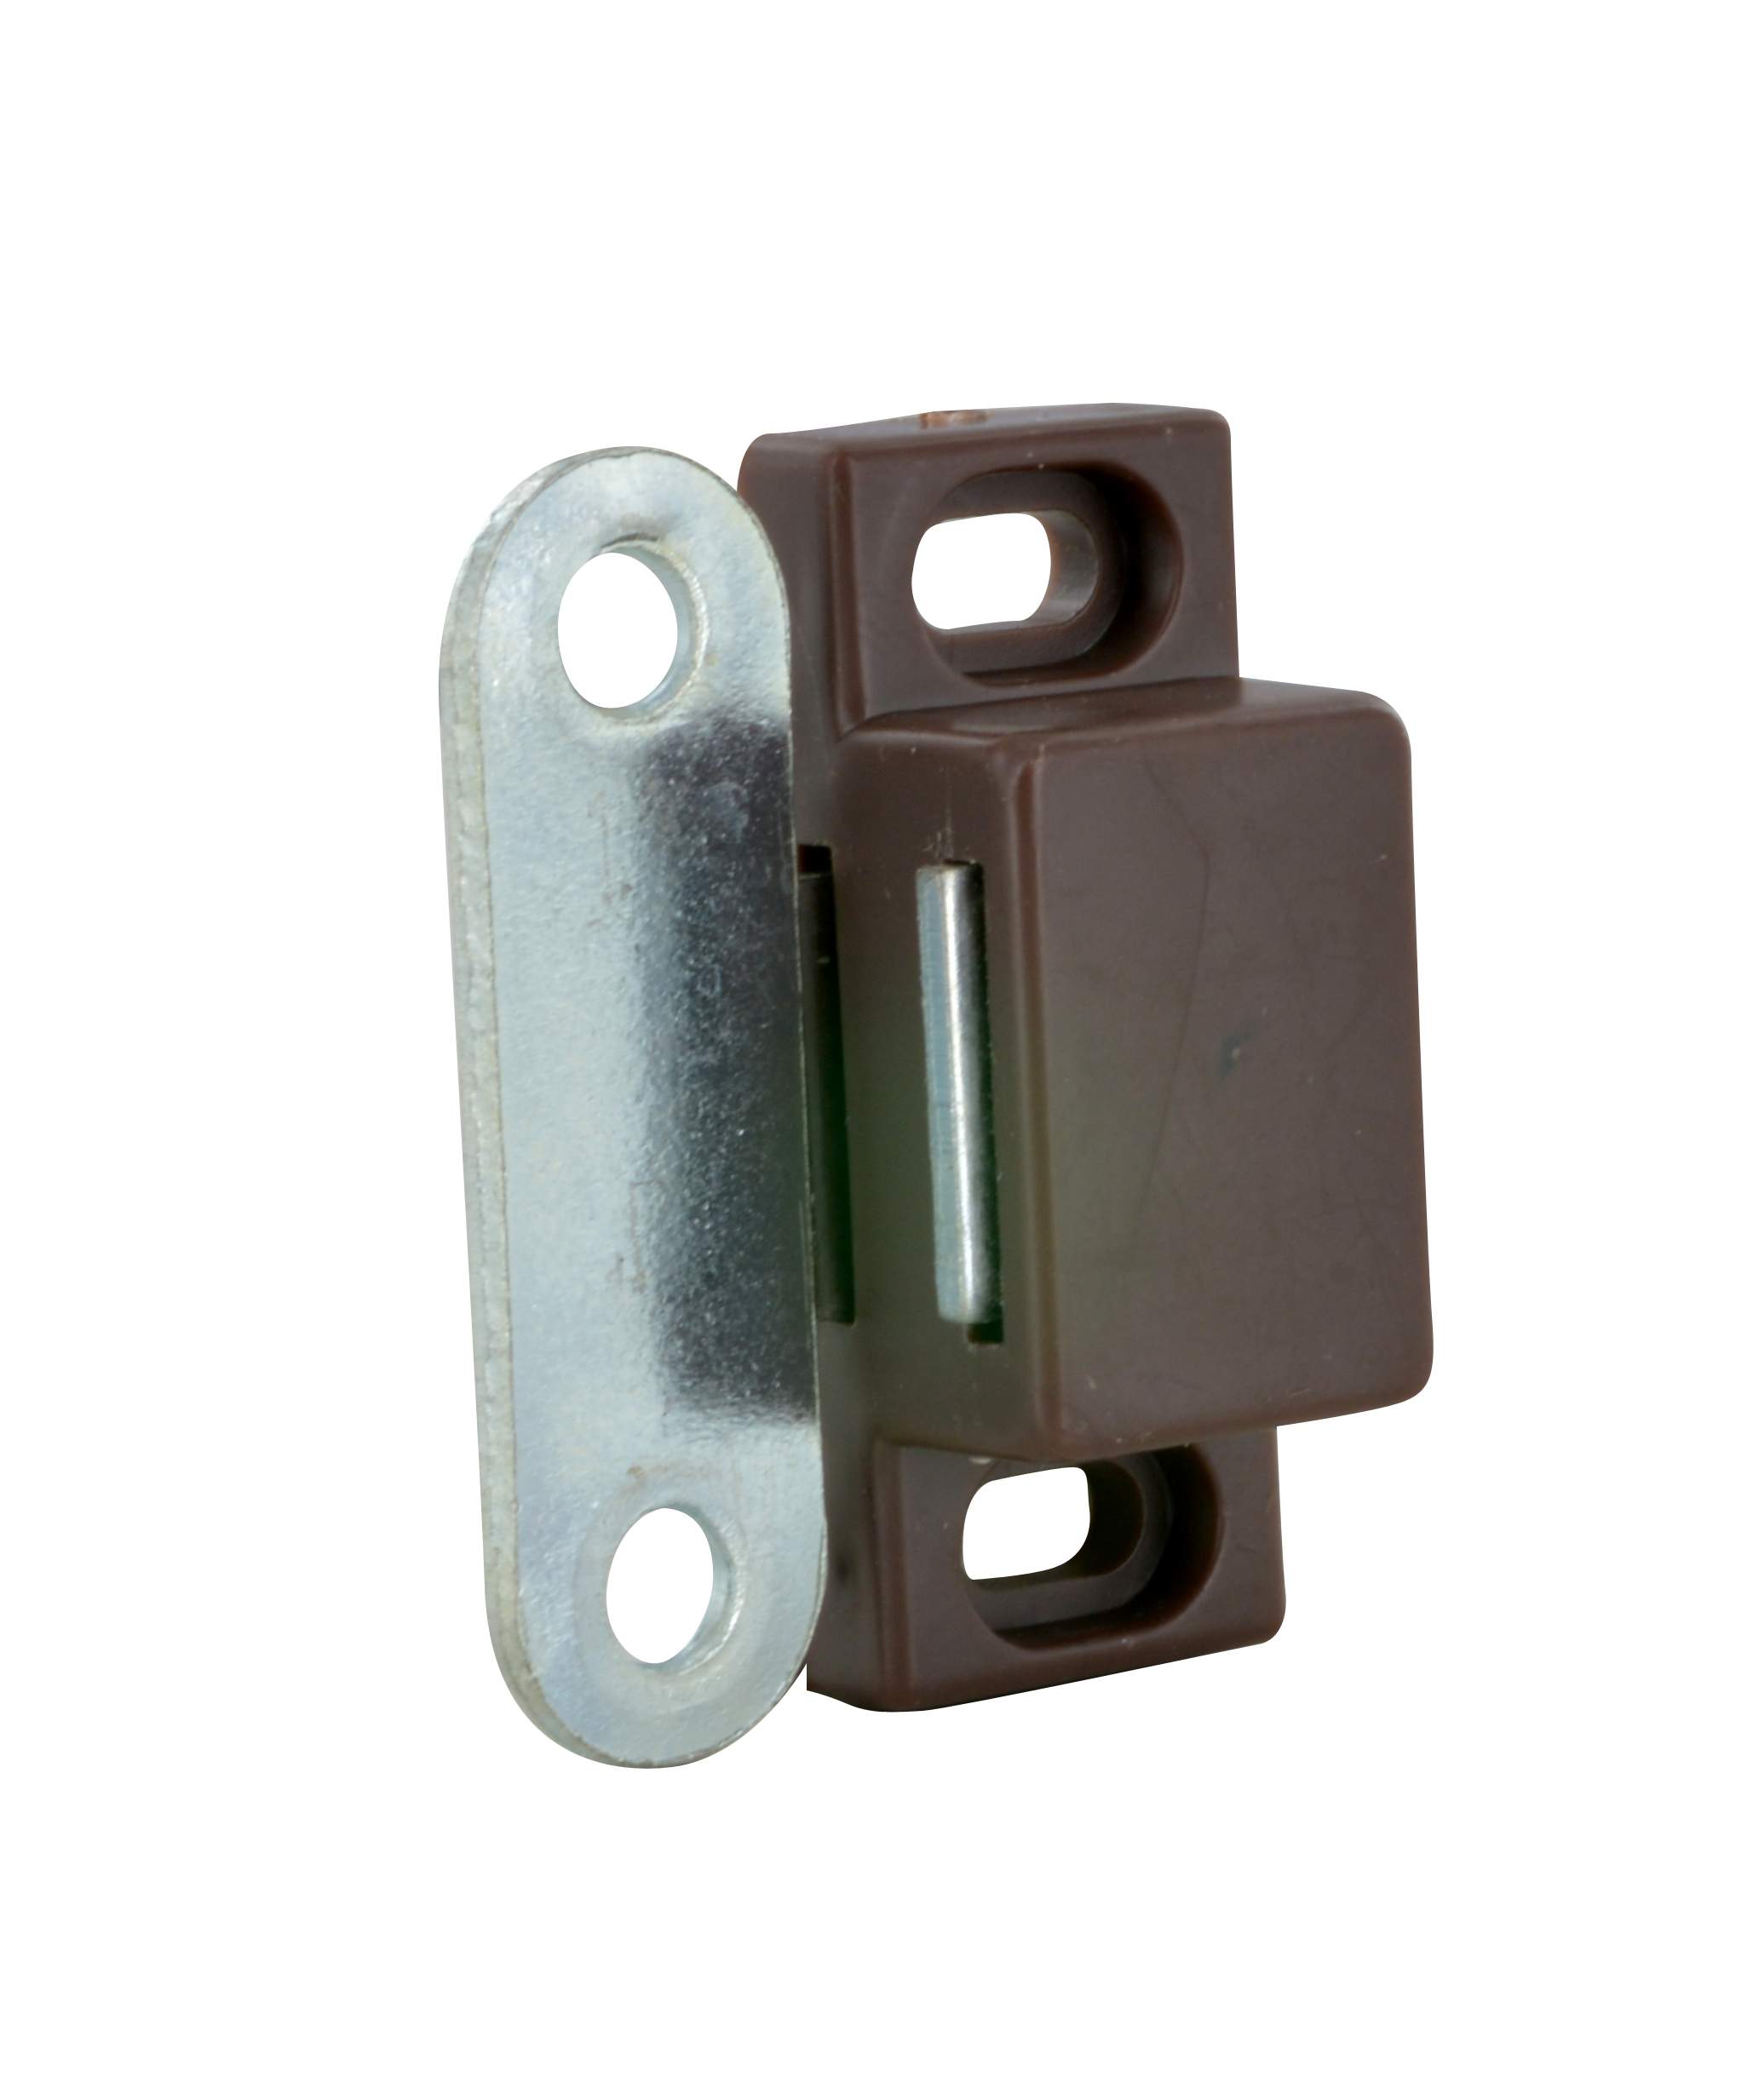 Magnetic latch brown 2kg, 46x16x15 mm, 2 pieces